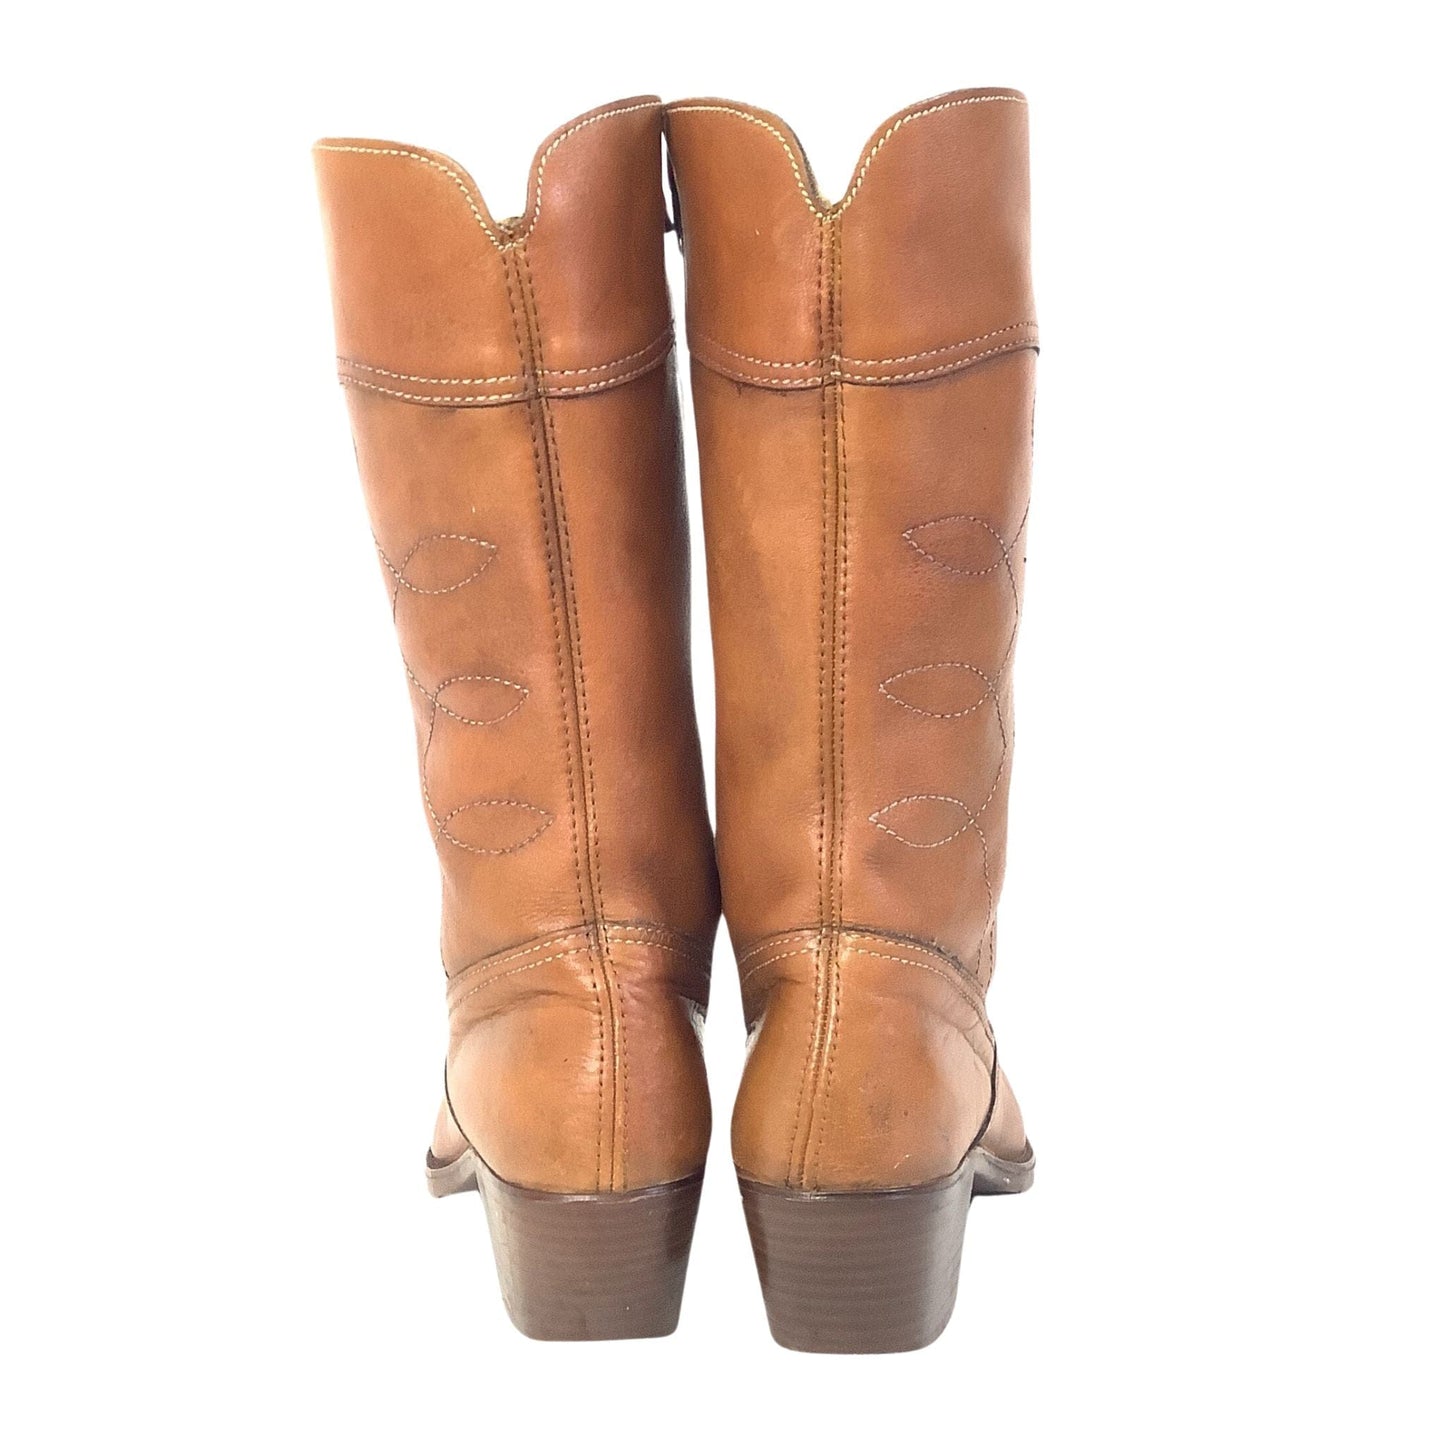 Shearling Lined Cowboy Boots 5 / Tan / Vintage 1960s